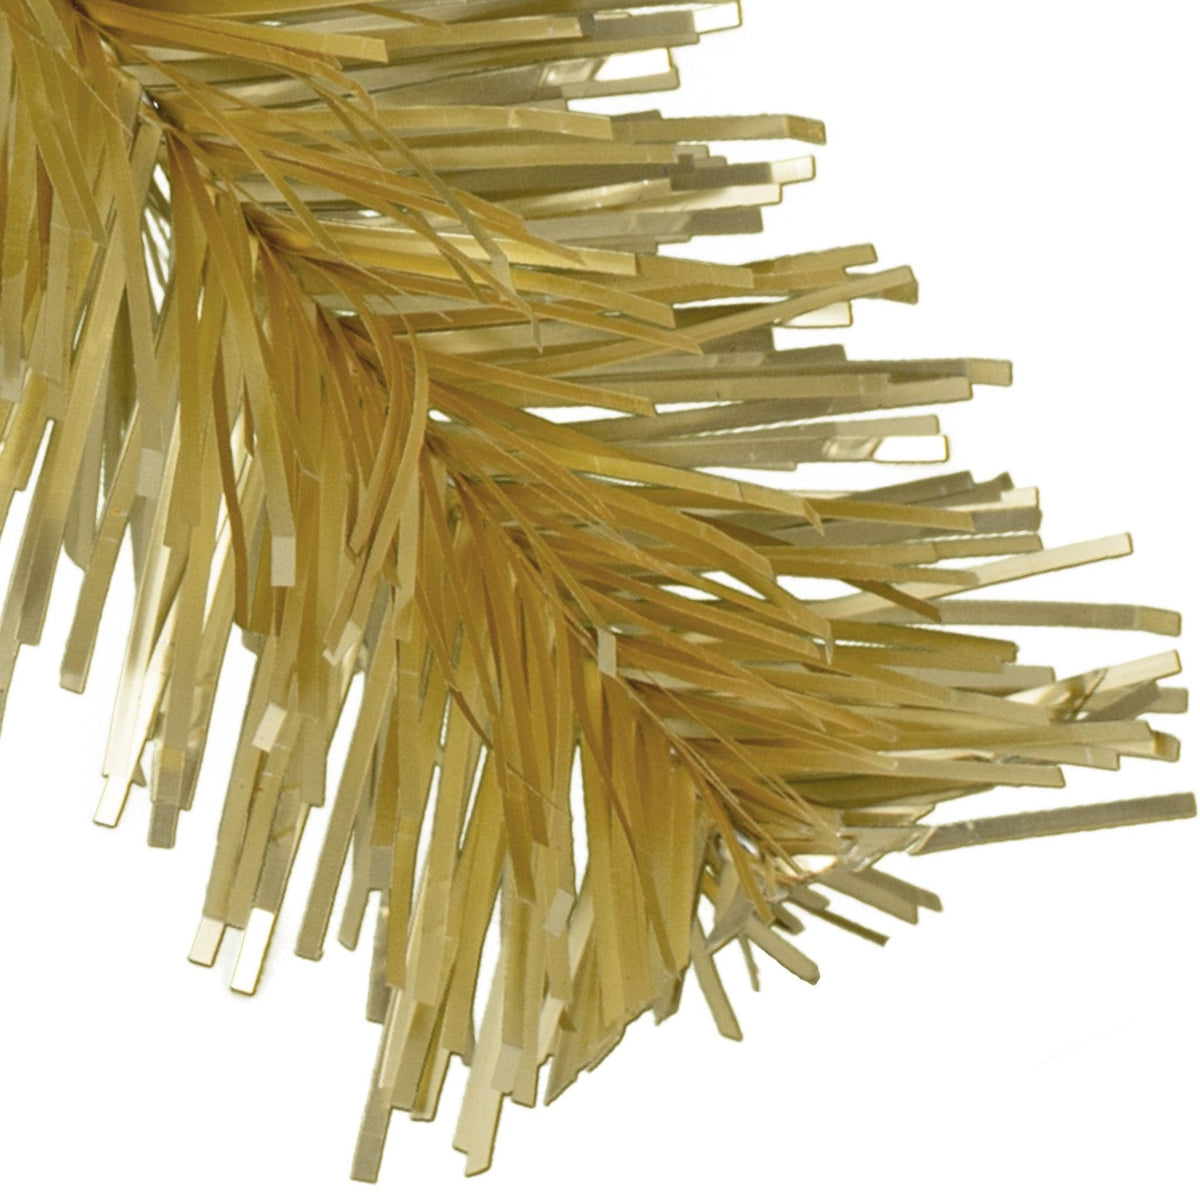 Celebrate Lee Display's 120th Anniversary with our brand new 25FT Antique Gold colored tinsel garland. Shop for tinsel at leedisplay.com